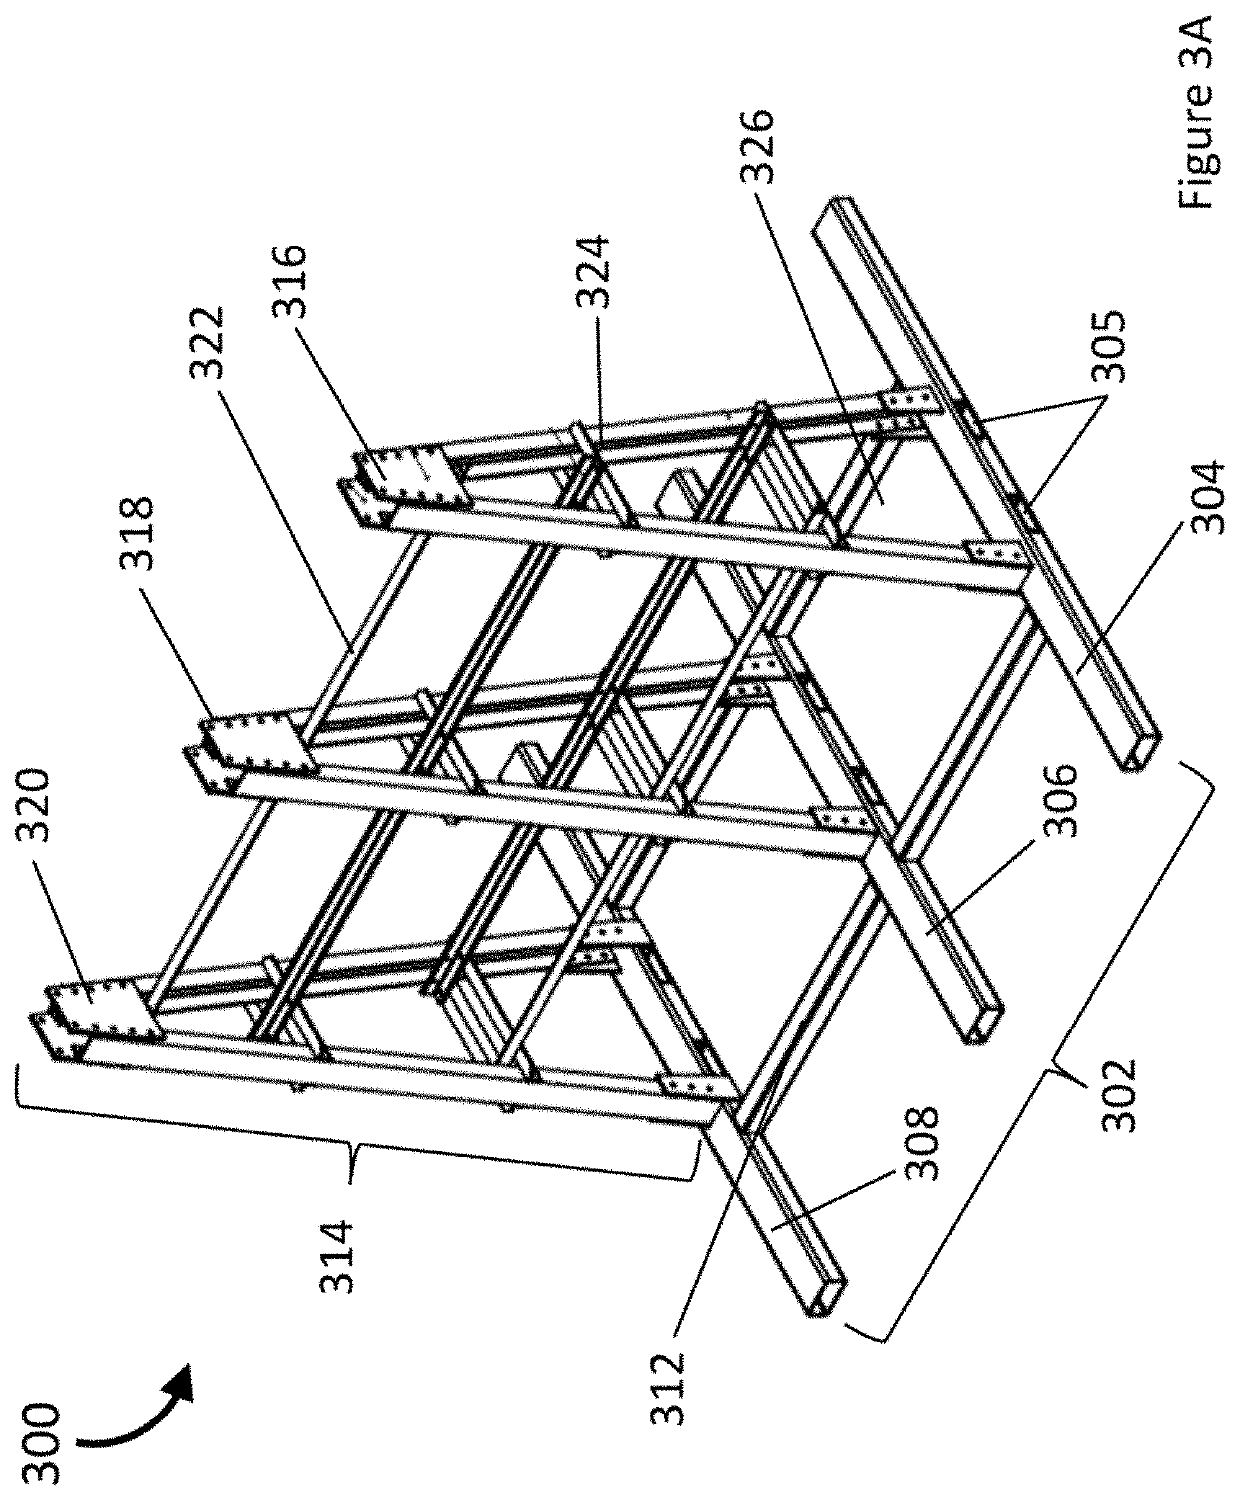 Rack lifter system and method